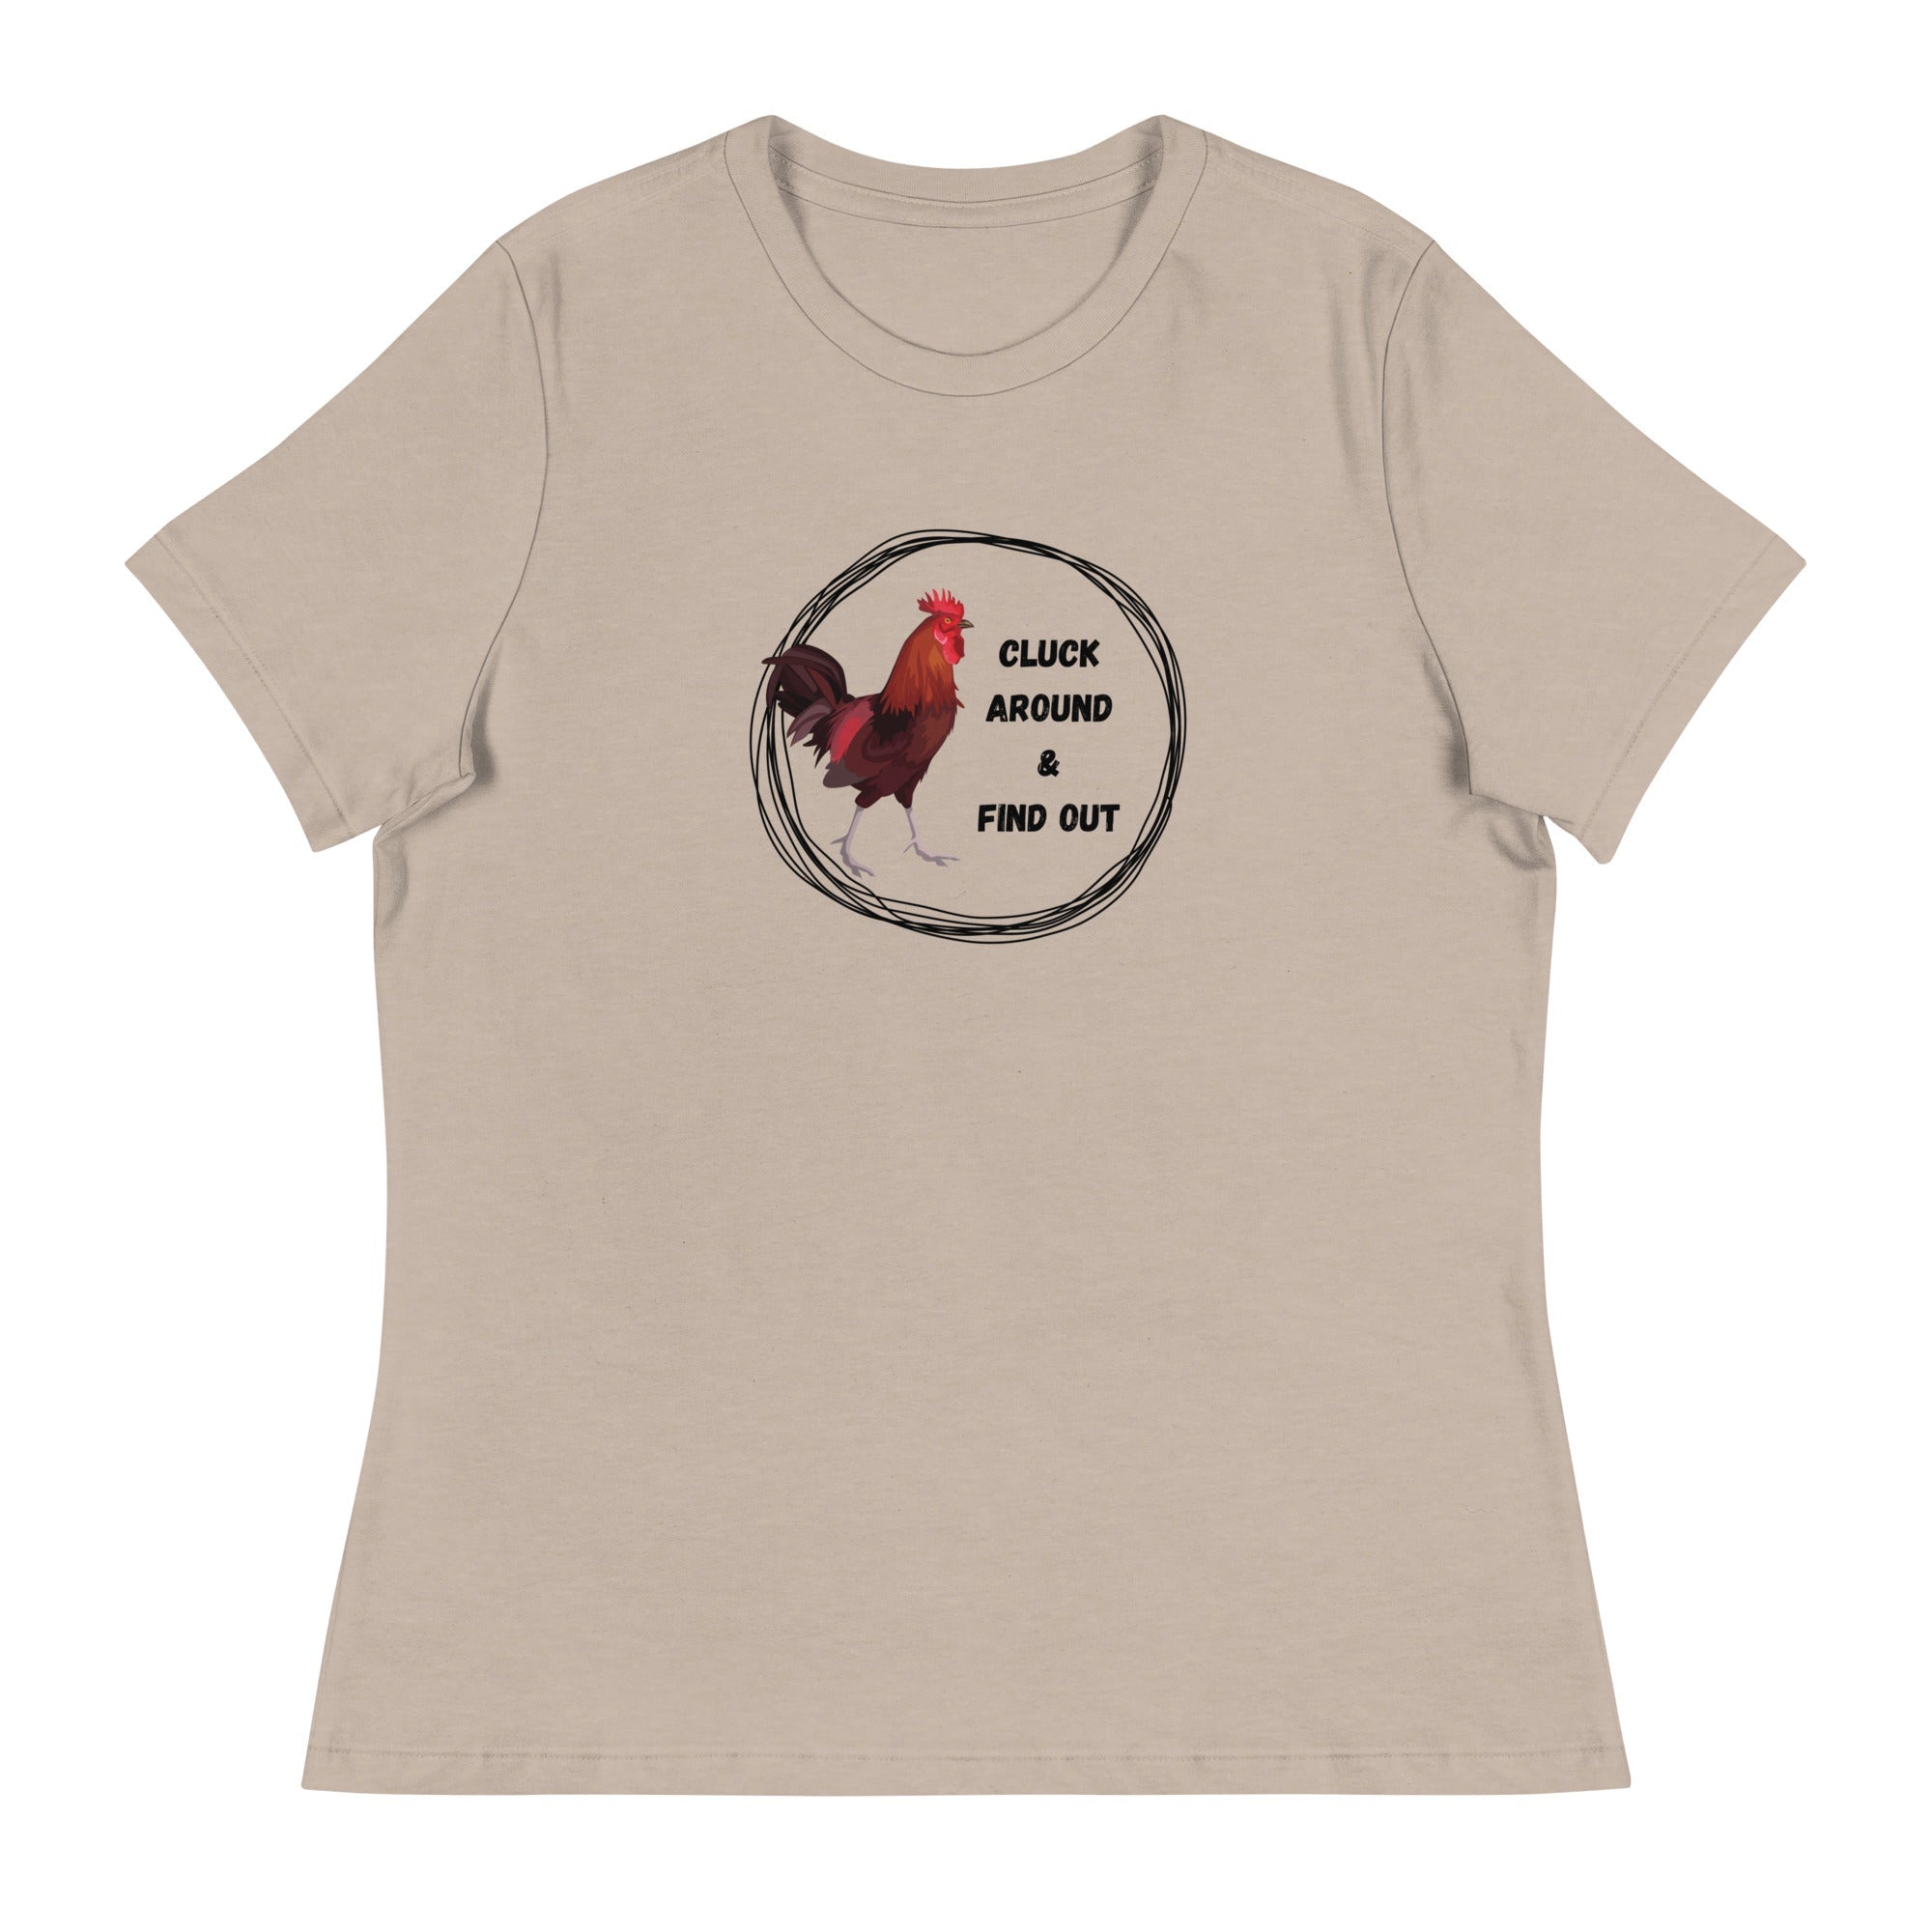 Cluck Around & Find Out Women's Relaxed T-Shirt - Cluck It All Farms